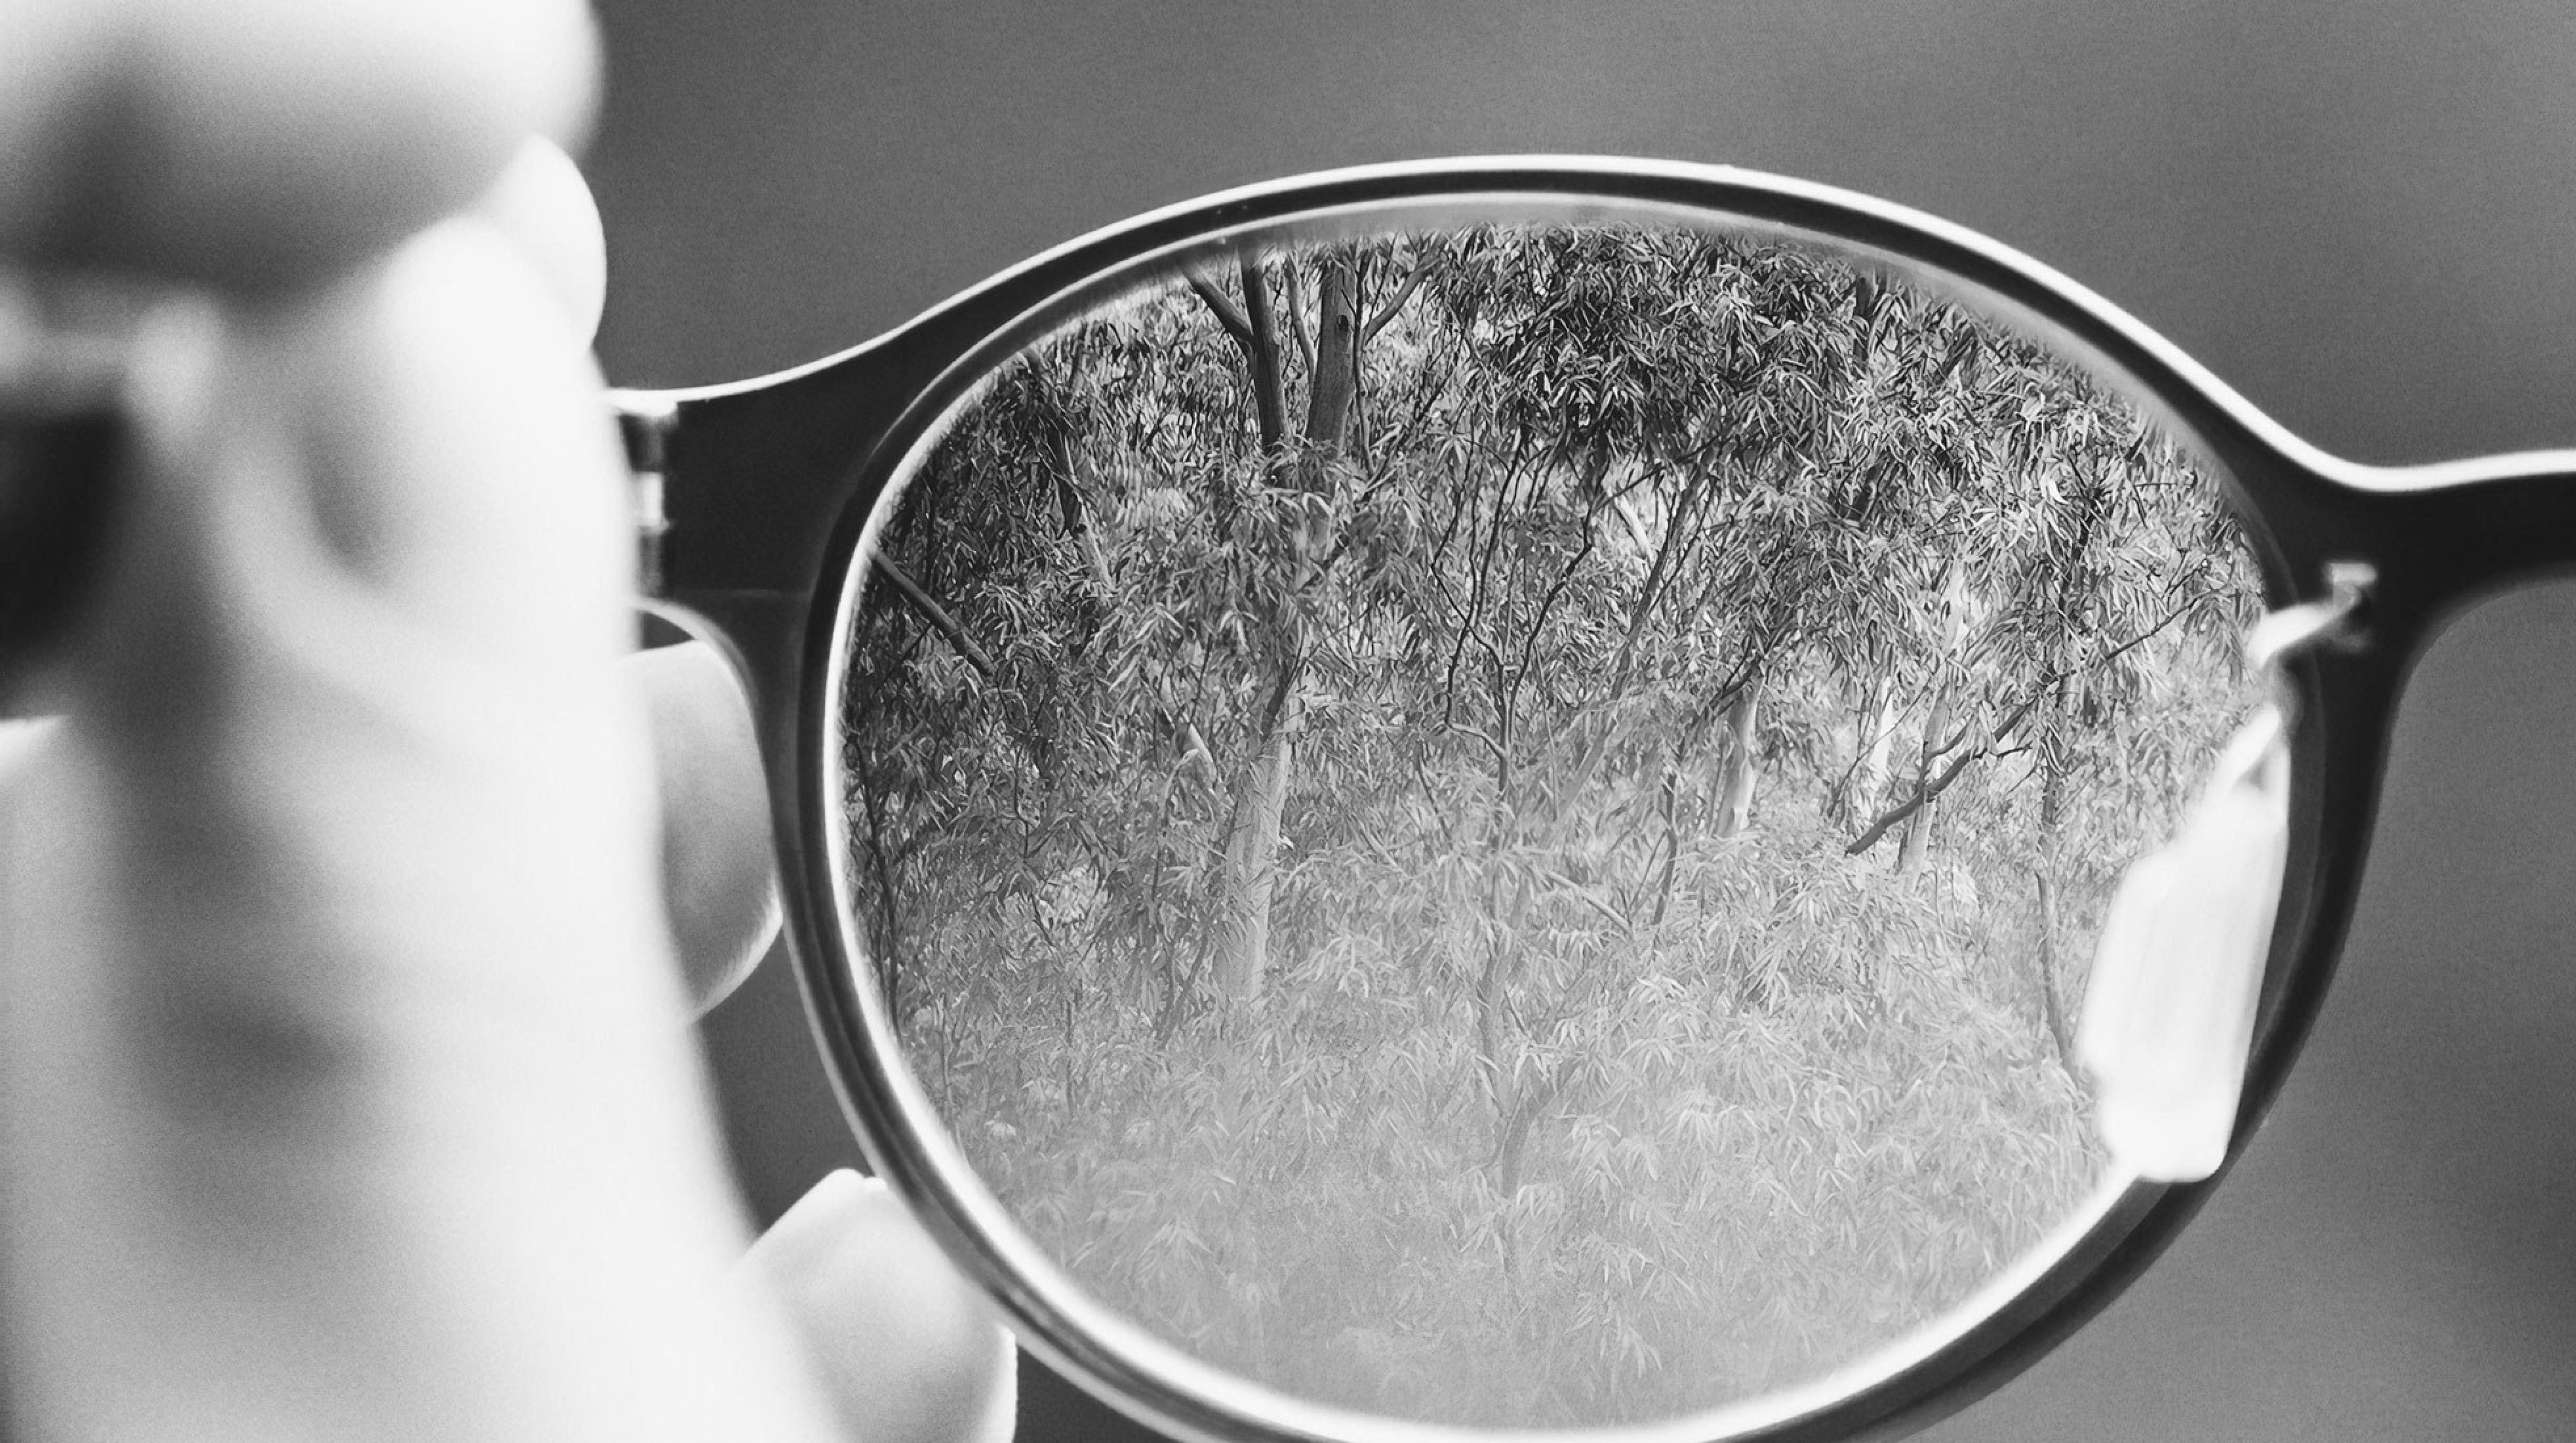 Black and white image of eye glasses focusing on trees